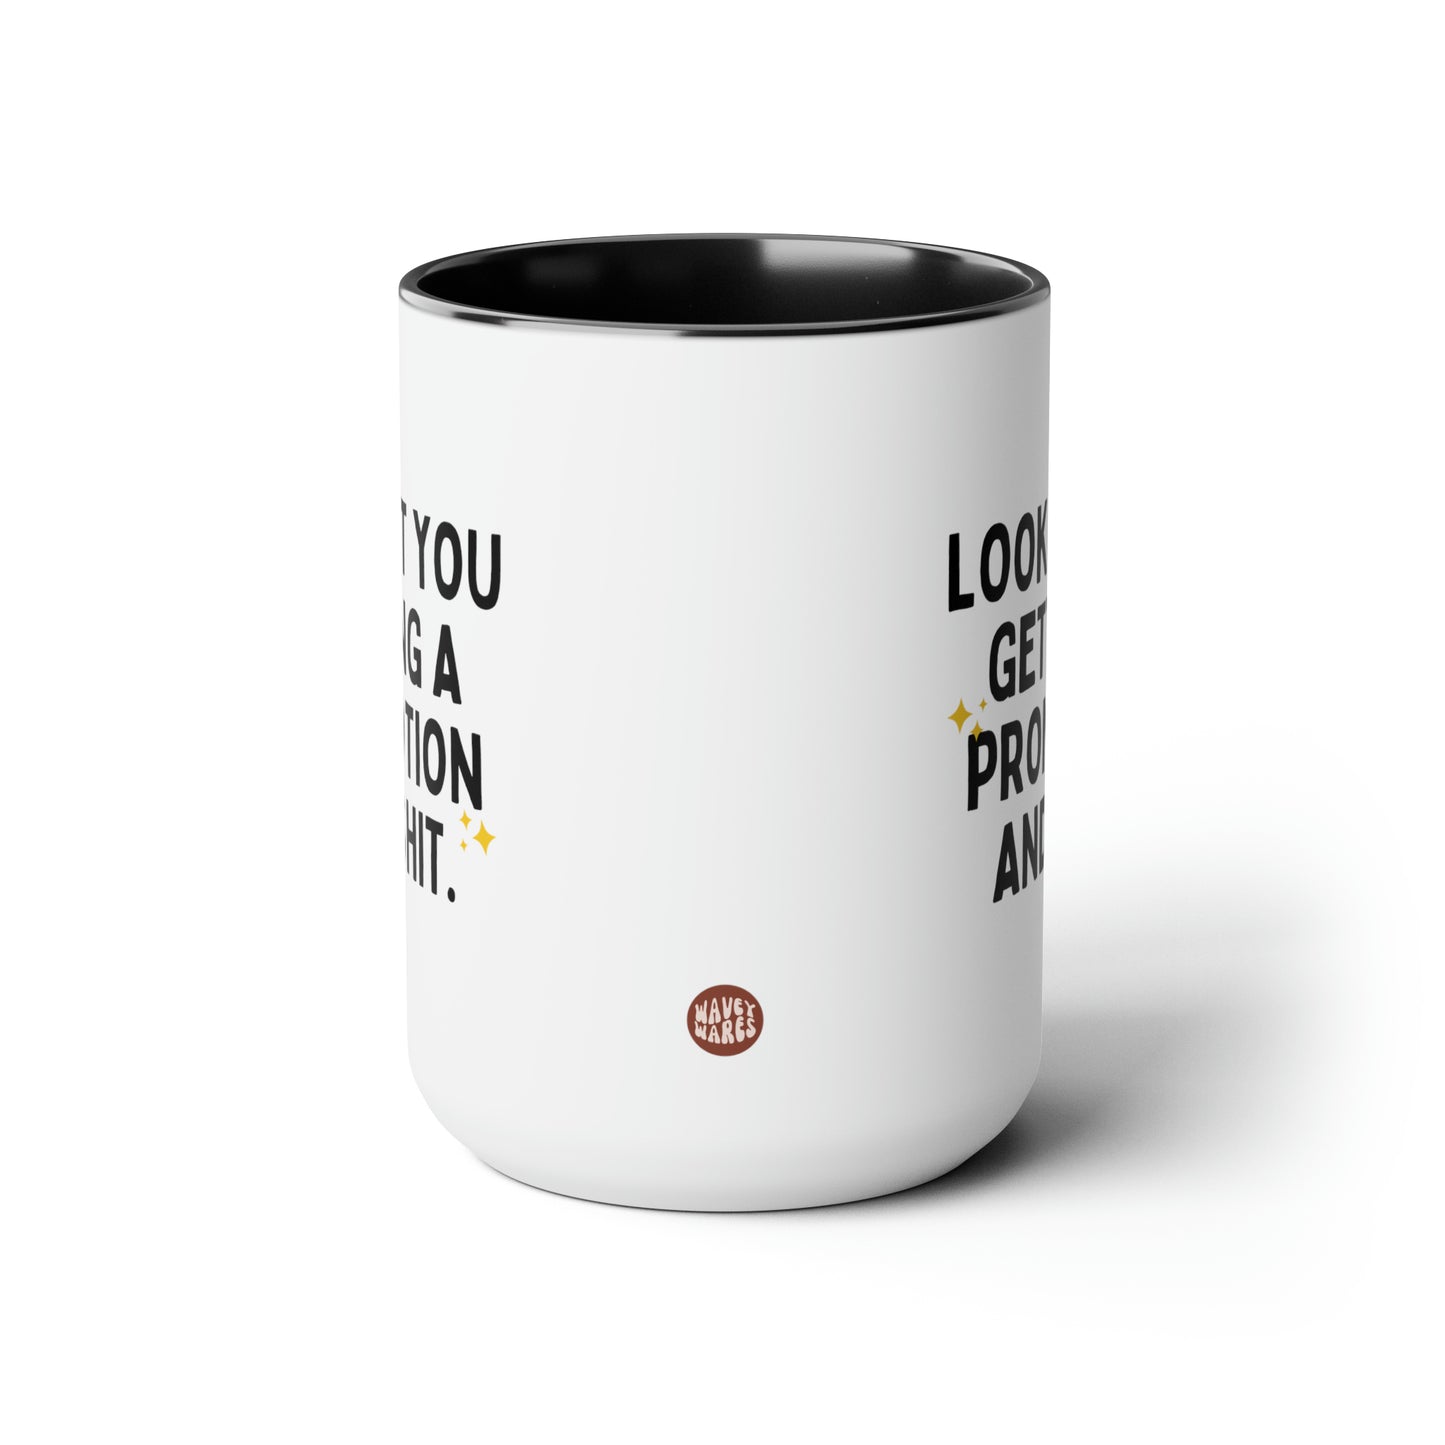 Look At You Getting A Promotion And Shit 15oz white with black accent funny large coffee mug gift for women men promoted coworker colleague congratulations waveywares wavey wares wavywares wavy wares side